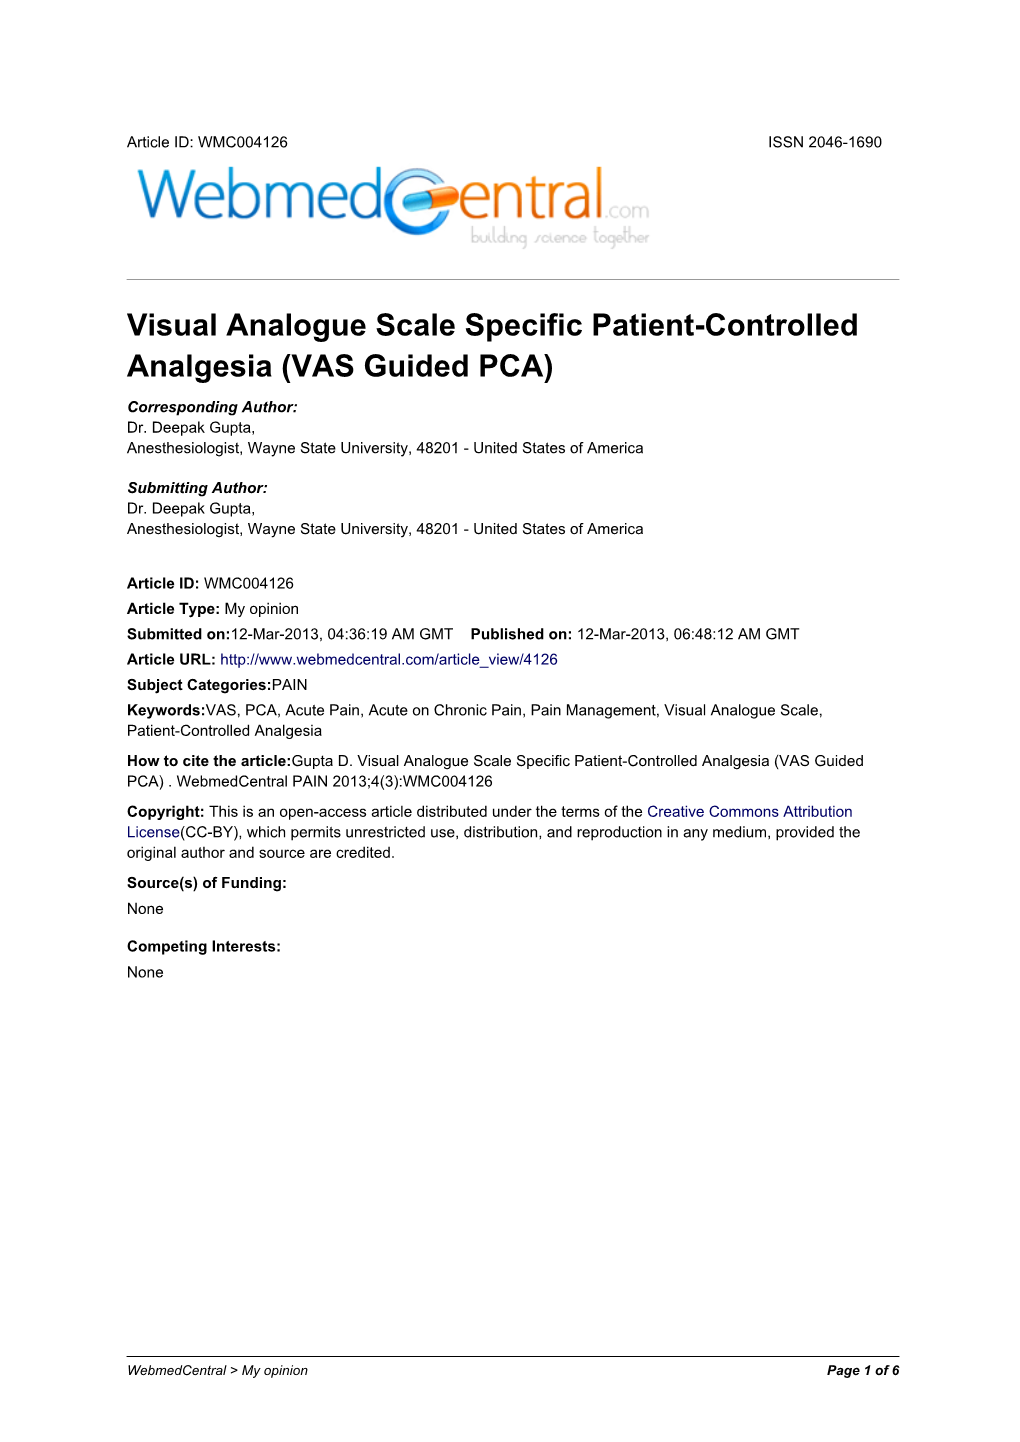 Visual Analogue Scale Specific Patient-Controlled Analgesia (VAS Guided PCA)